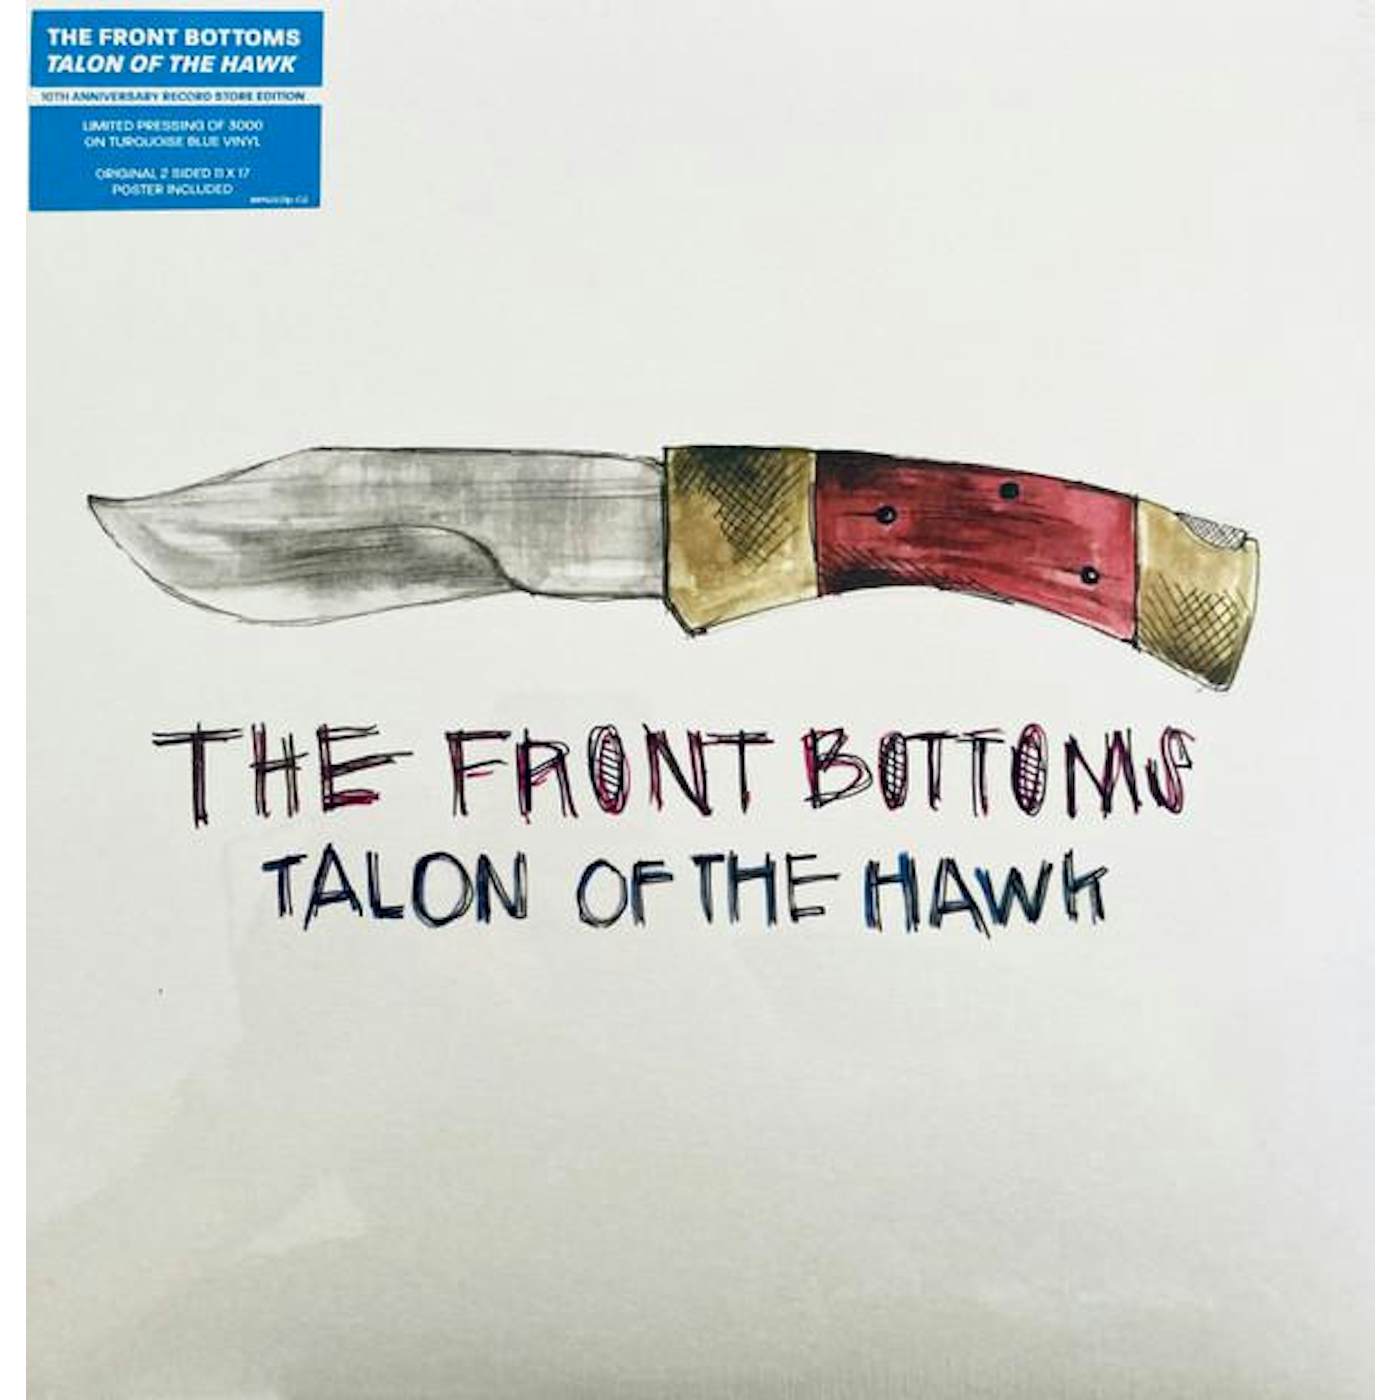 The Front Bottoms TALON OF THE HAWK (10 YEAR ANNIVERSARY EDITION/TURQUOISE BLUE VINYL) Vinyl Record